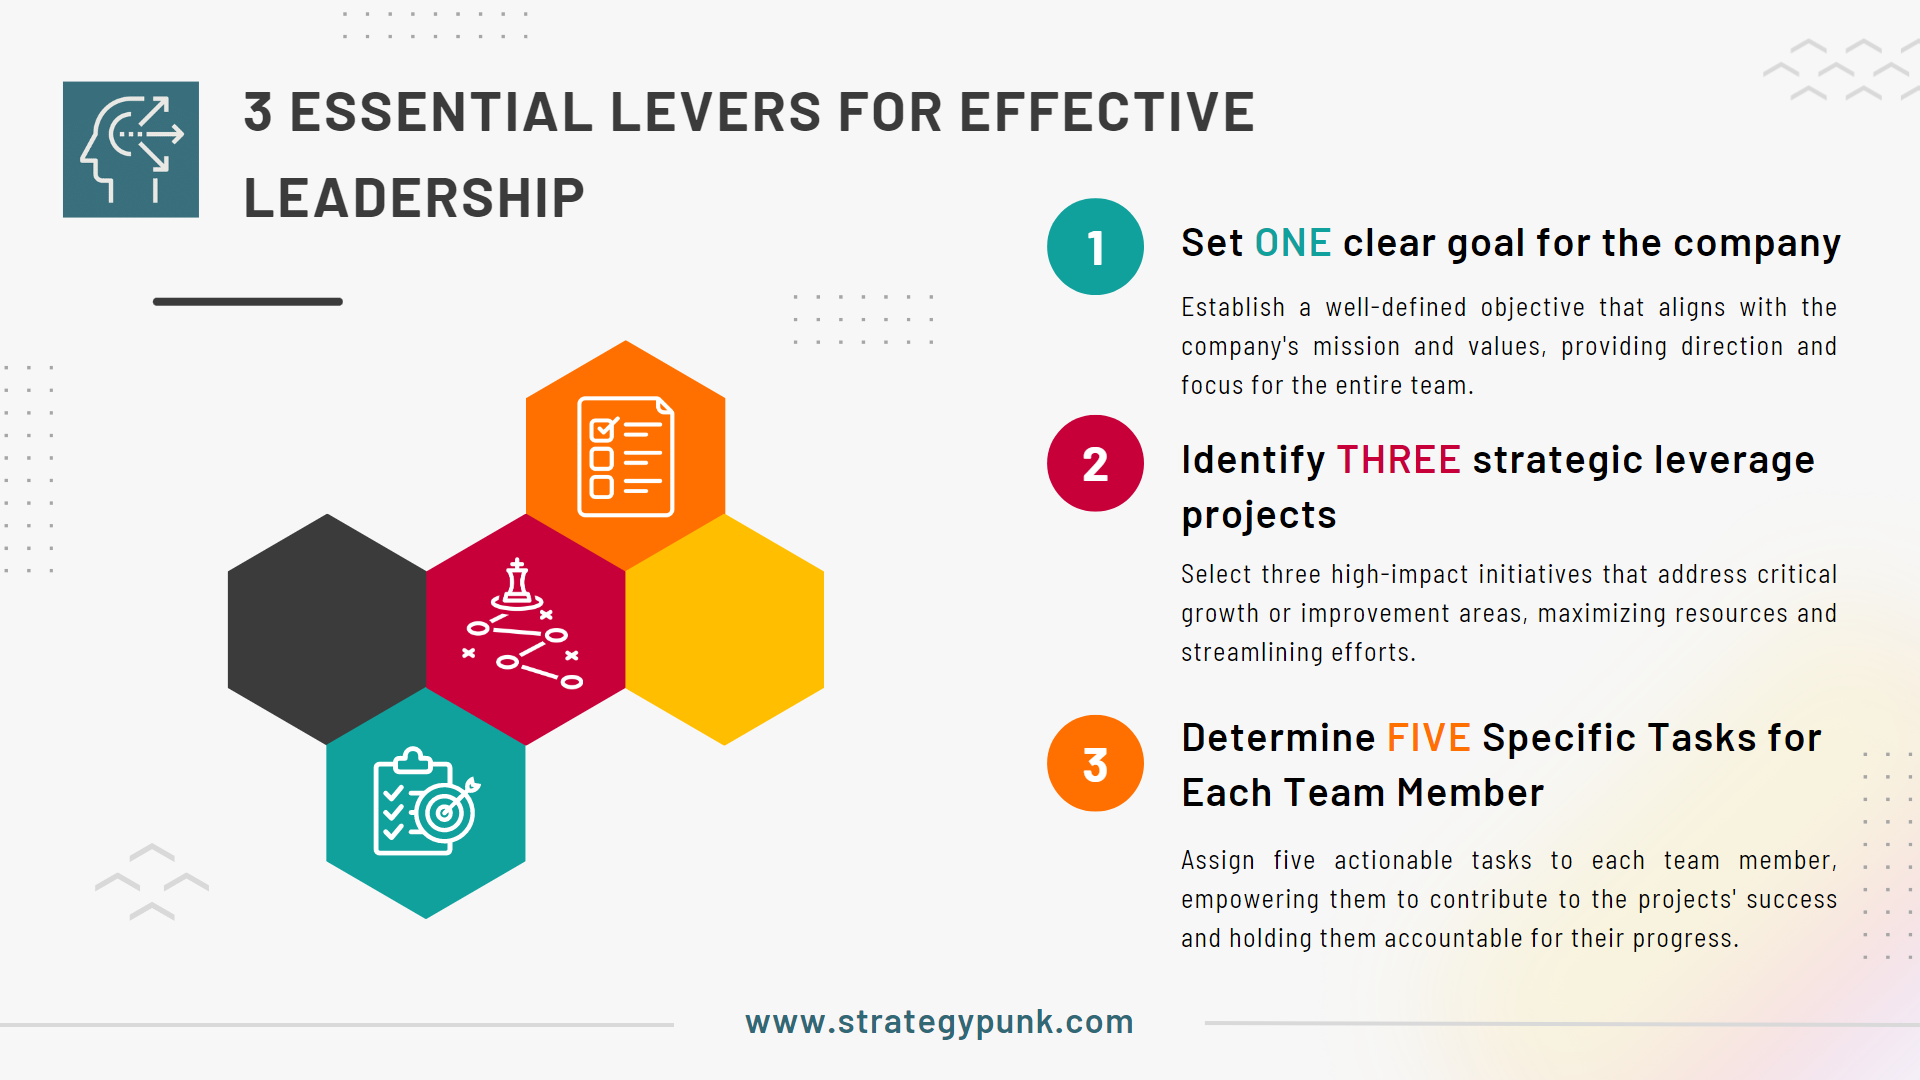 The 3 Essential Levers for Effective Leadership and Achieving Results